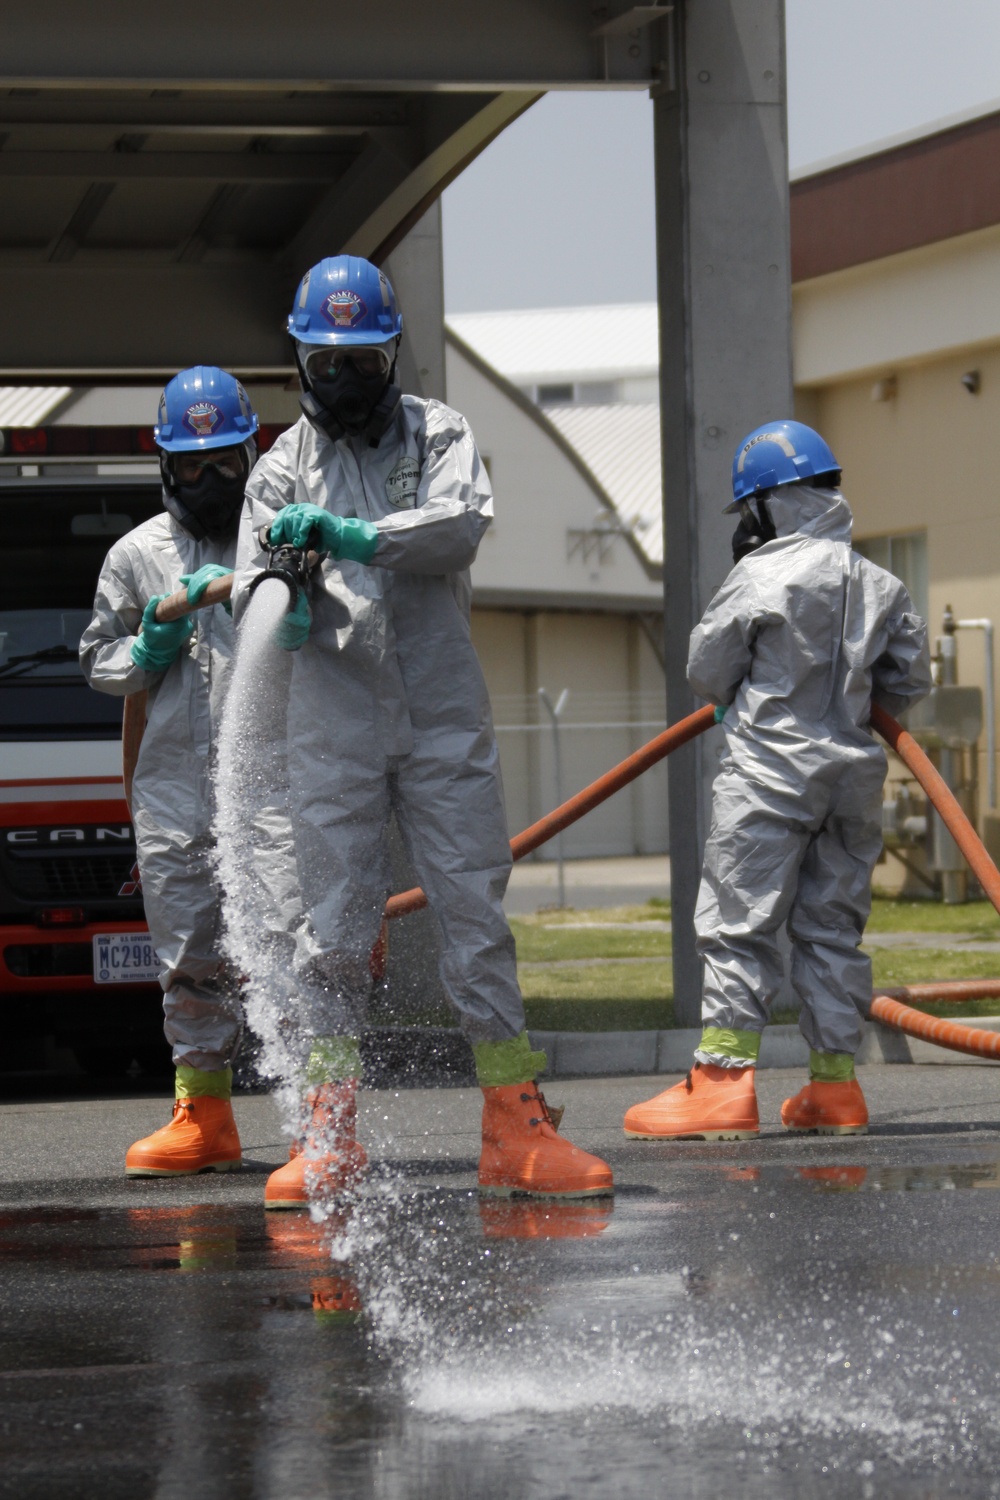 Service members practice for hazardous material safety